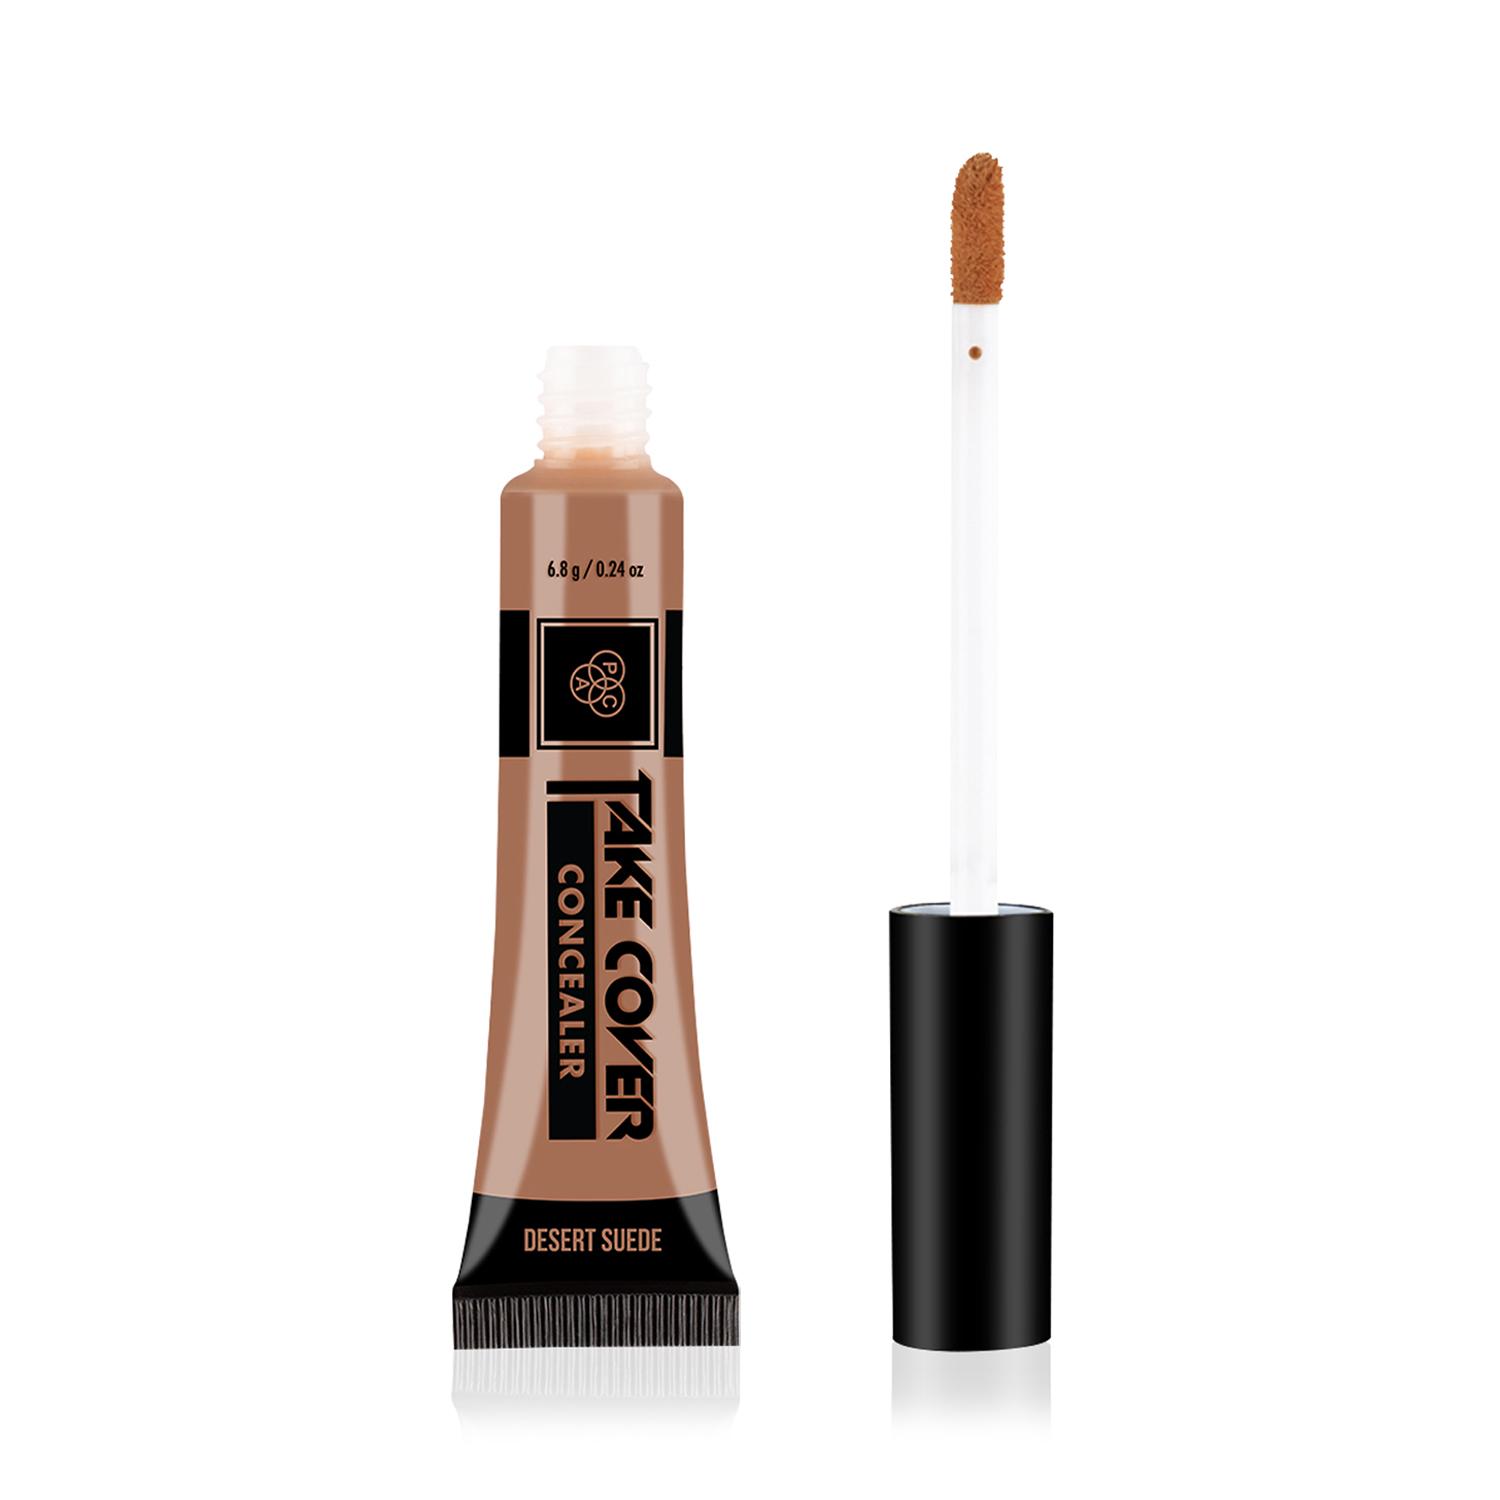 PAC | PAC Take Cover Concealer - 15 Dessert Suede (6.8g)